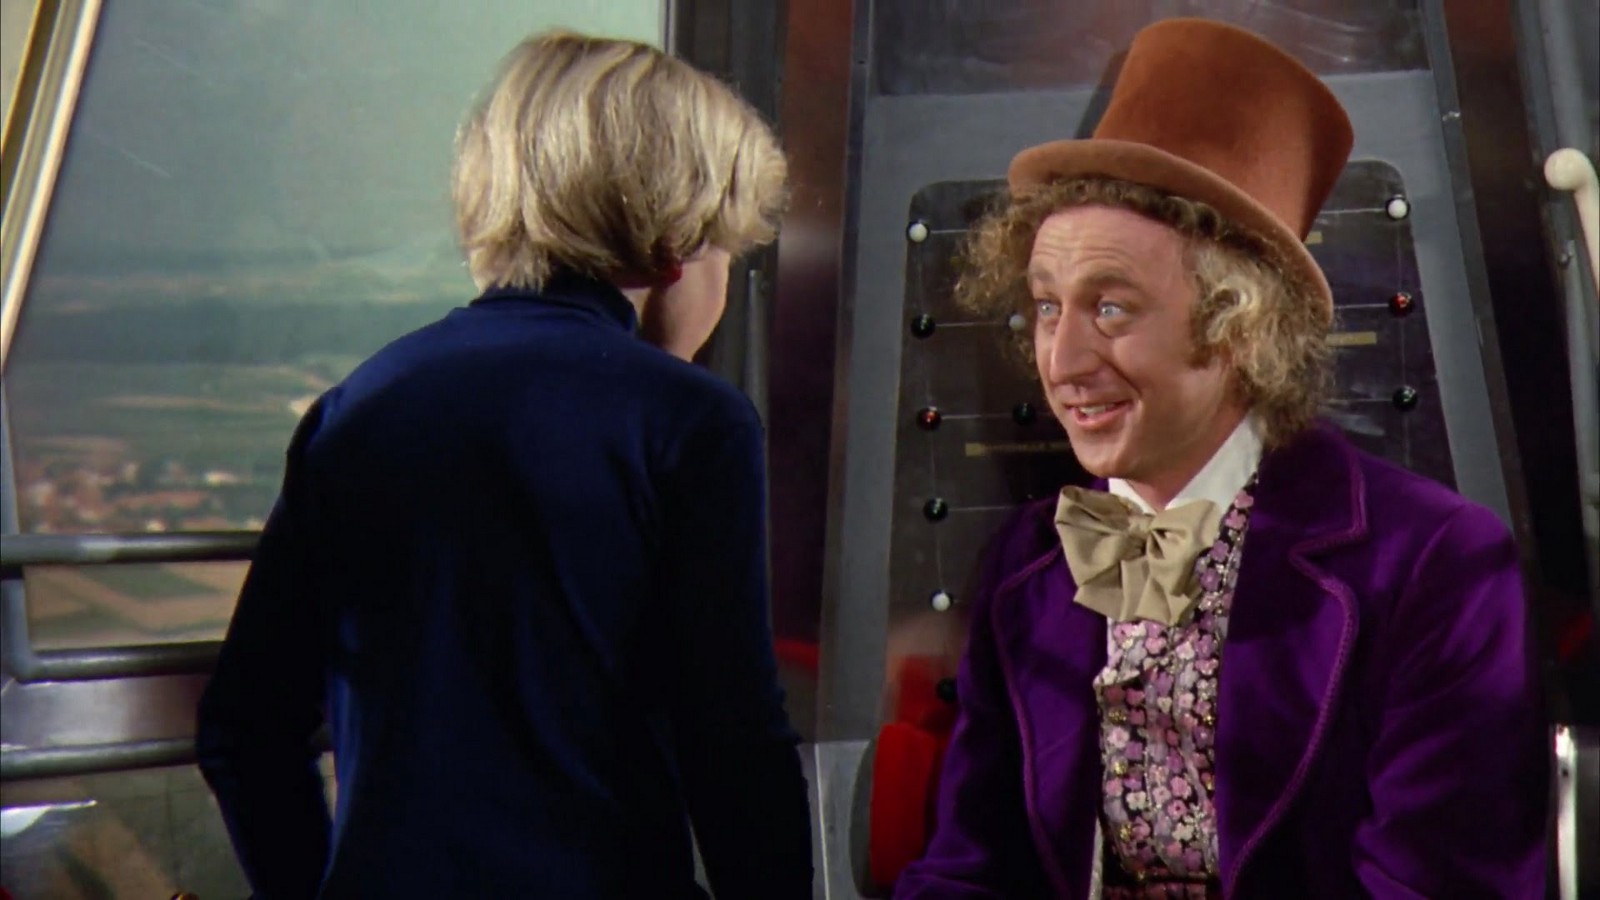 Willy Wonka and Charlie on the Great Glass Elevator